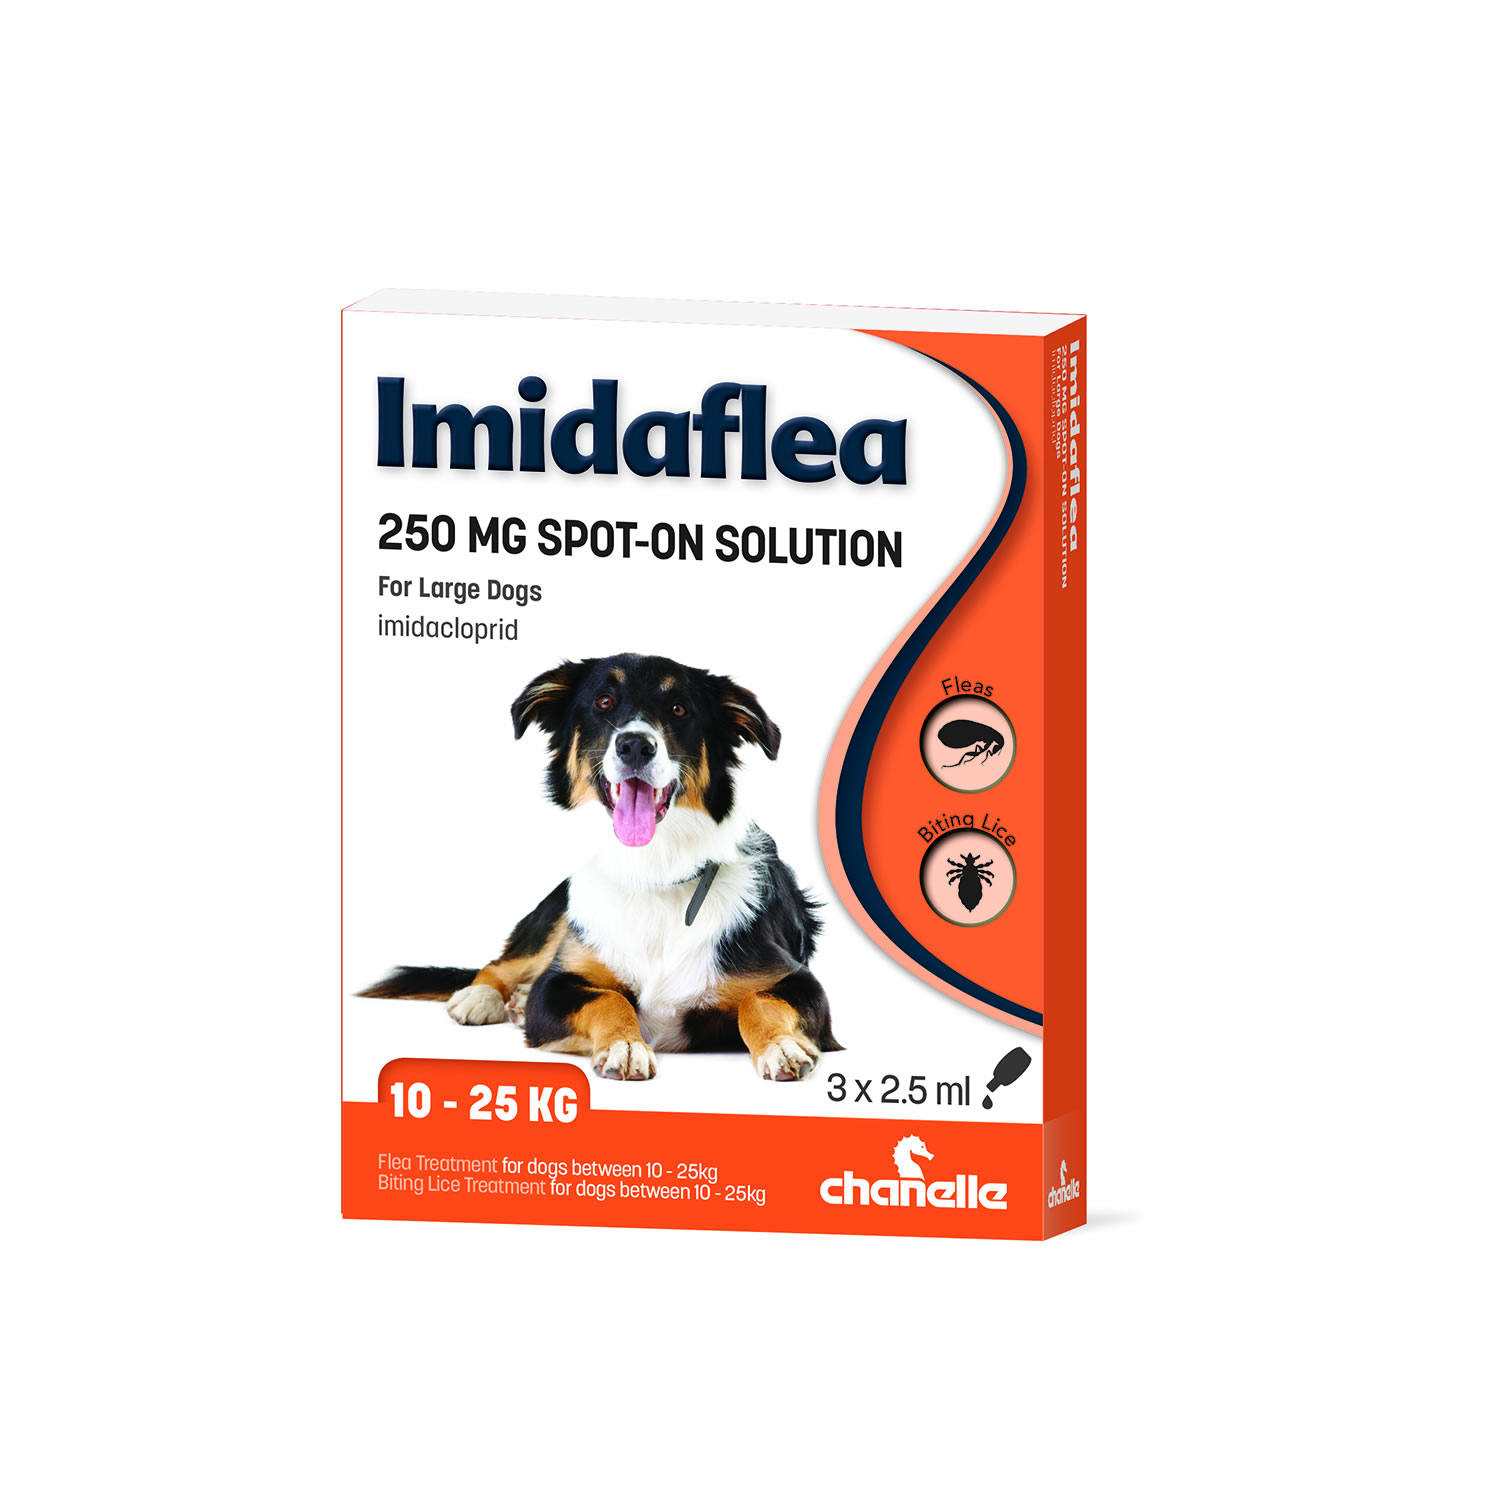 CHANELLE IMIDAFLEA 250GM SPOT-ON FOR LARGE DOGS 3 PIPETTES 10 - 25 KG - 3 PIPETTES